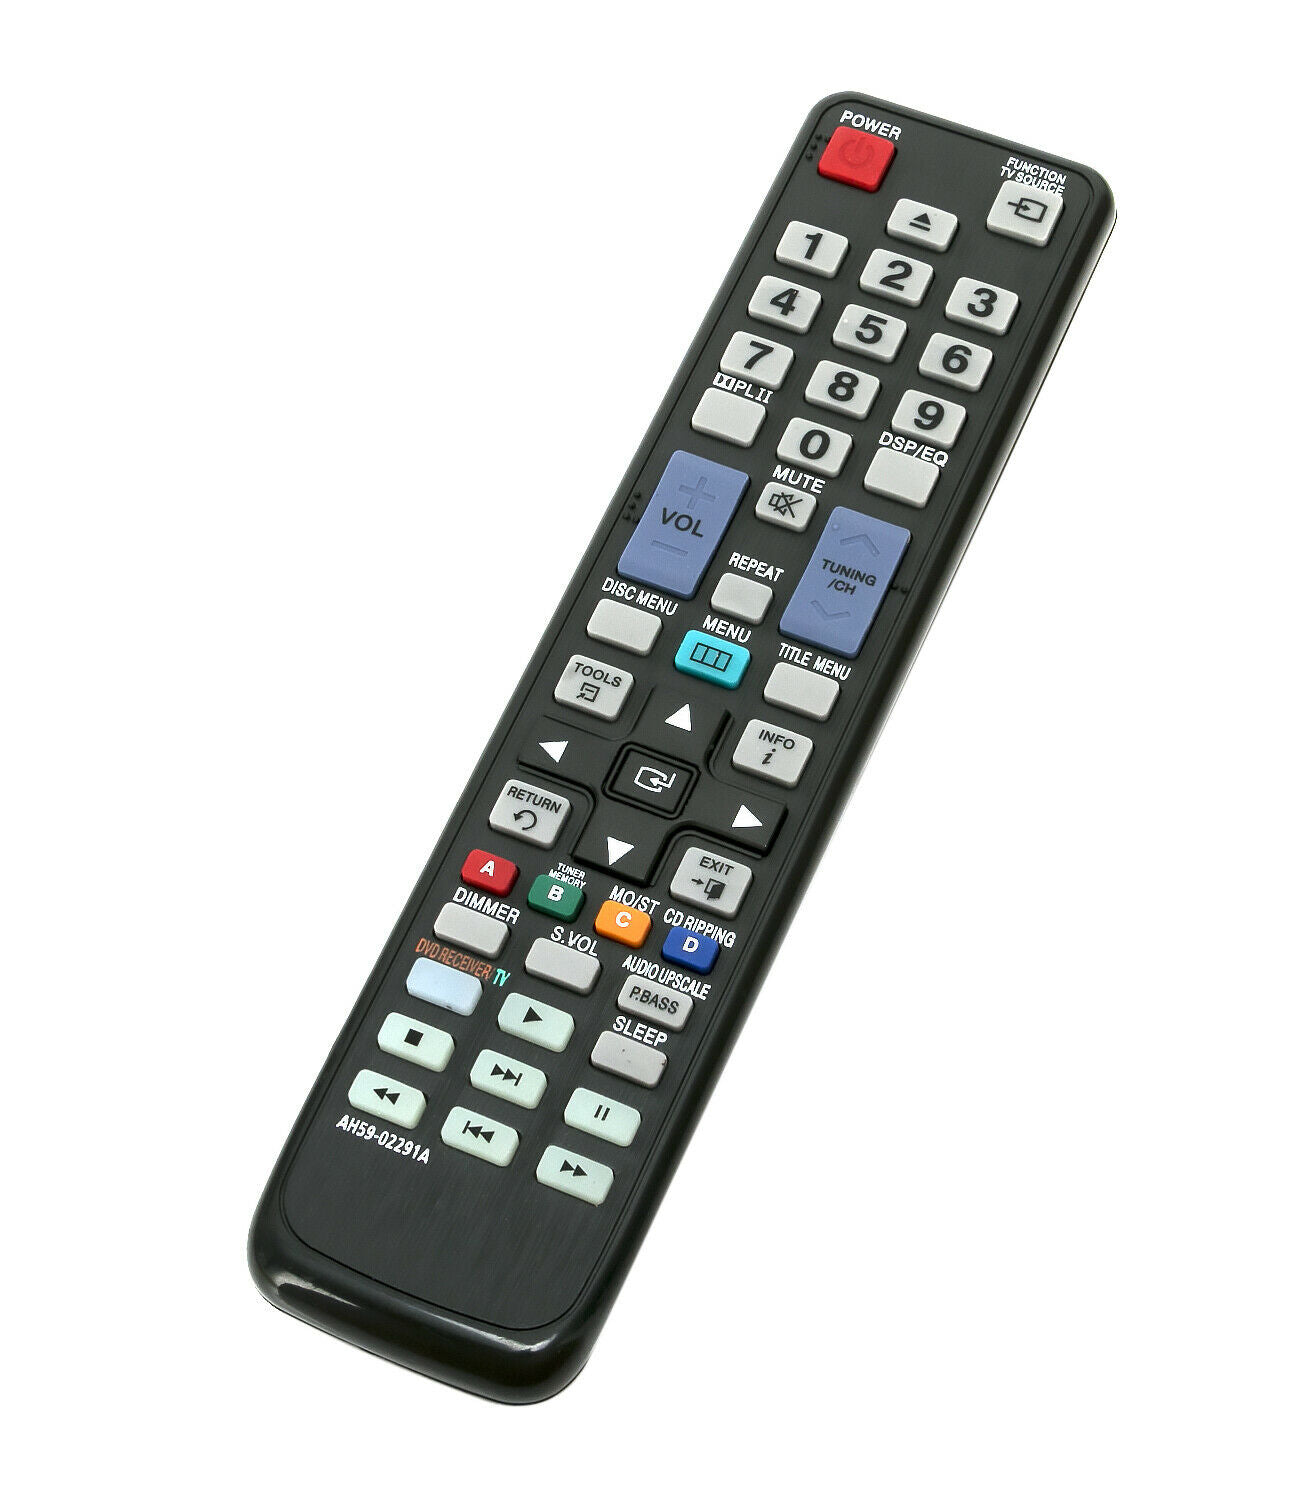 AH59-02291A Replacement Remote Control for Samsung home theater ht-c450 ht-c453 ht-c455